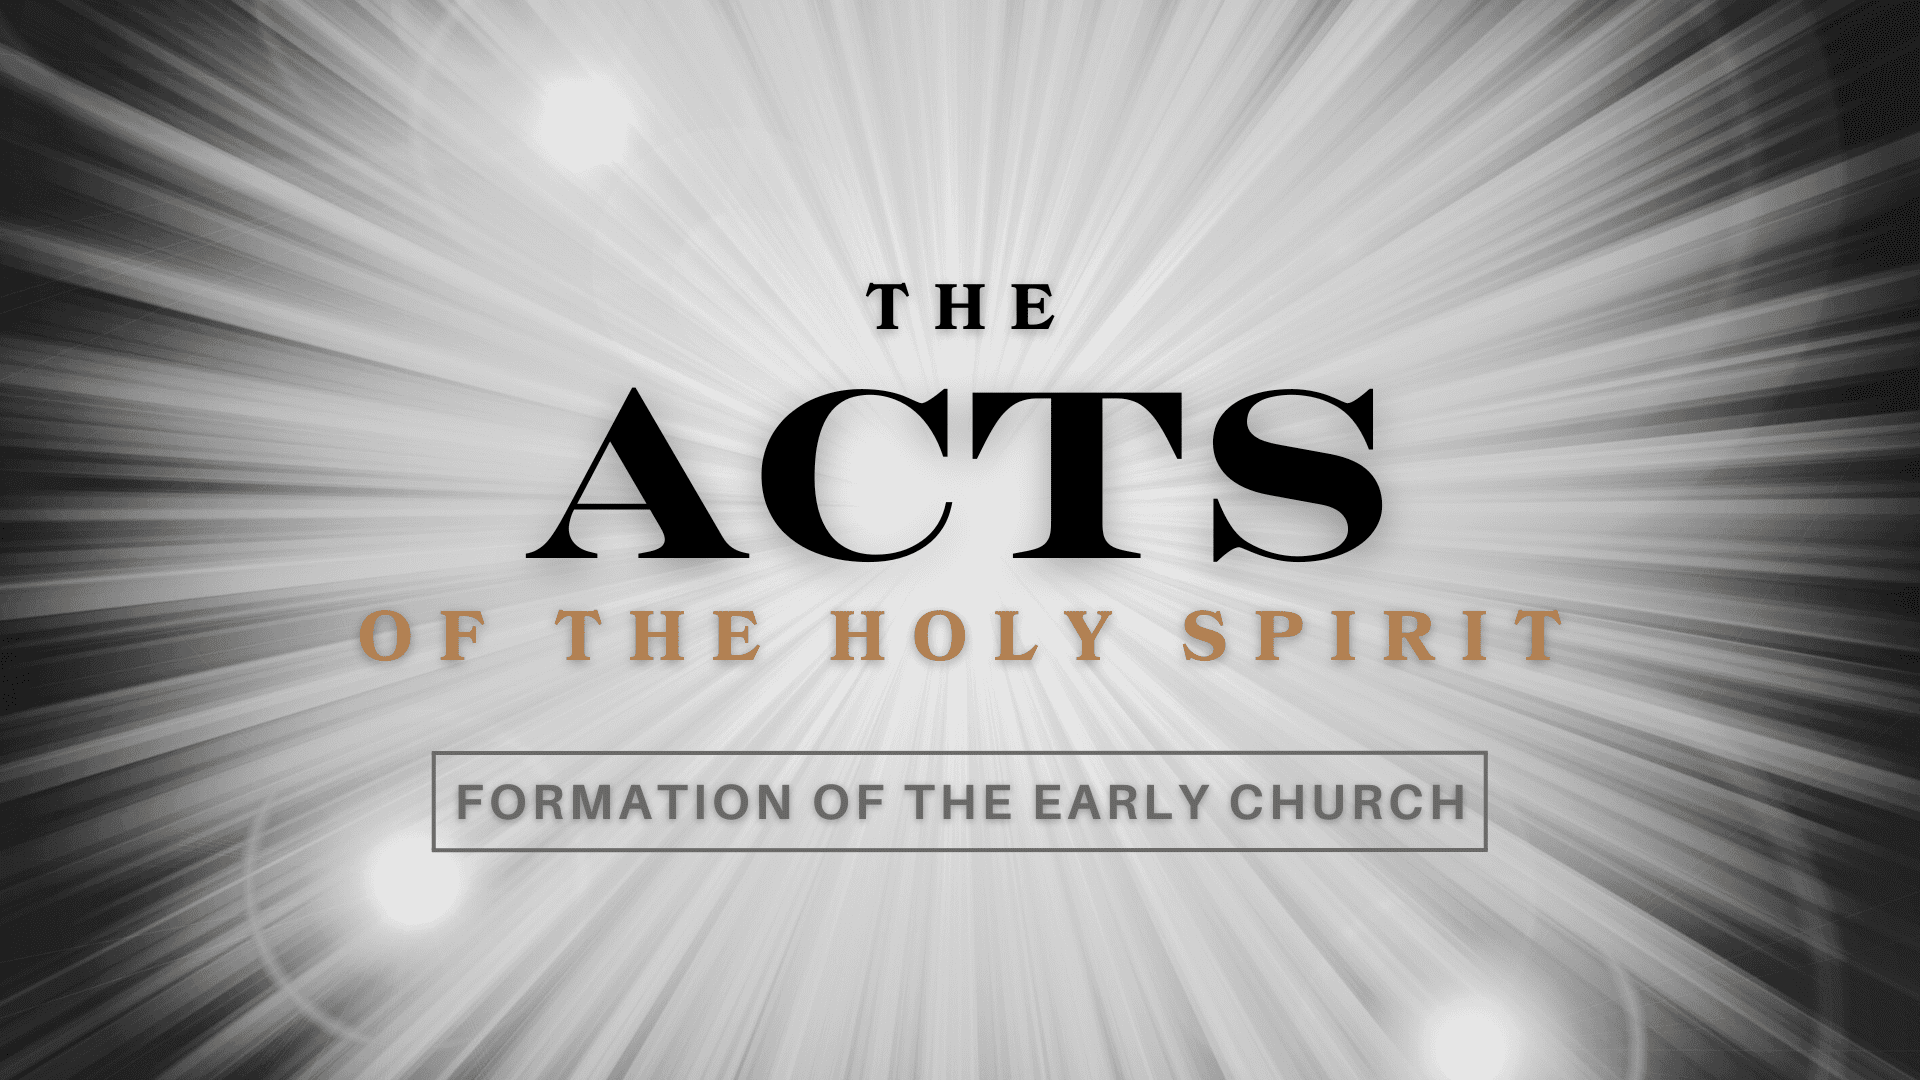 SERMON | Acts 4: 23-31 | A Prayer for Boldness